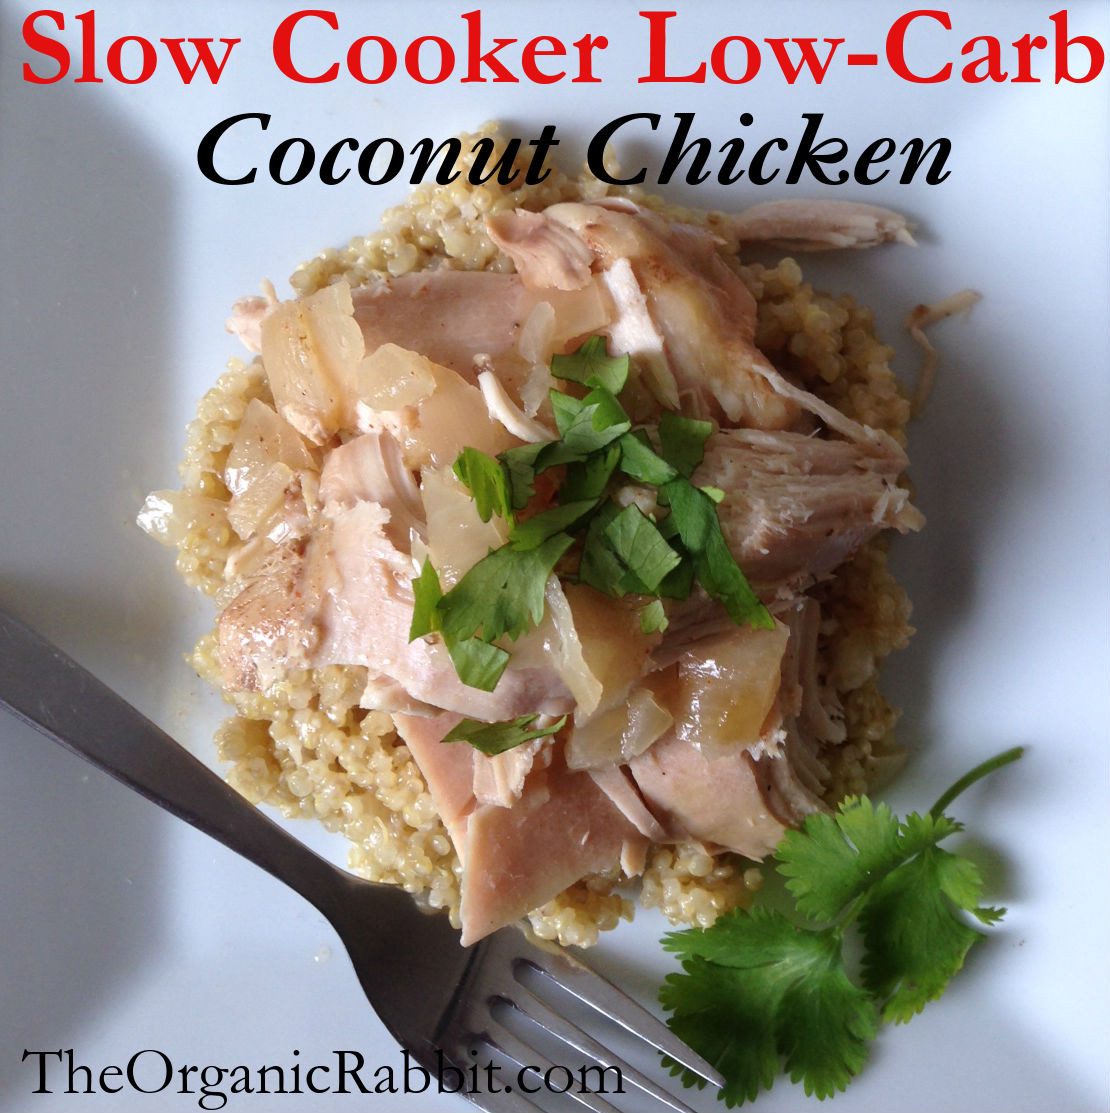 Low Carb Slow Cooker Recipes
 paleo low carb protein coconut chicken slow cooker weight